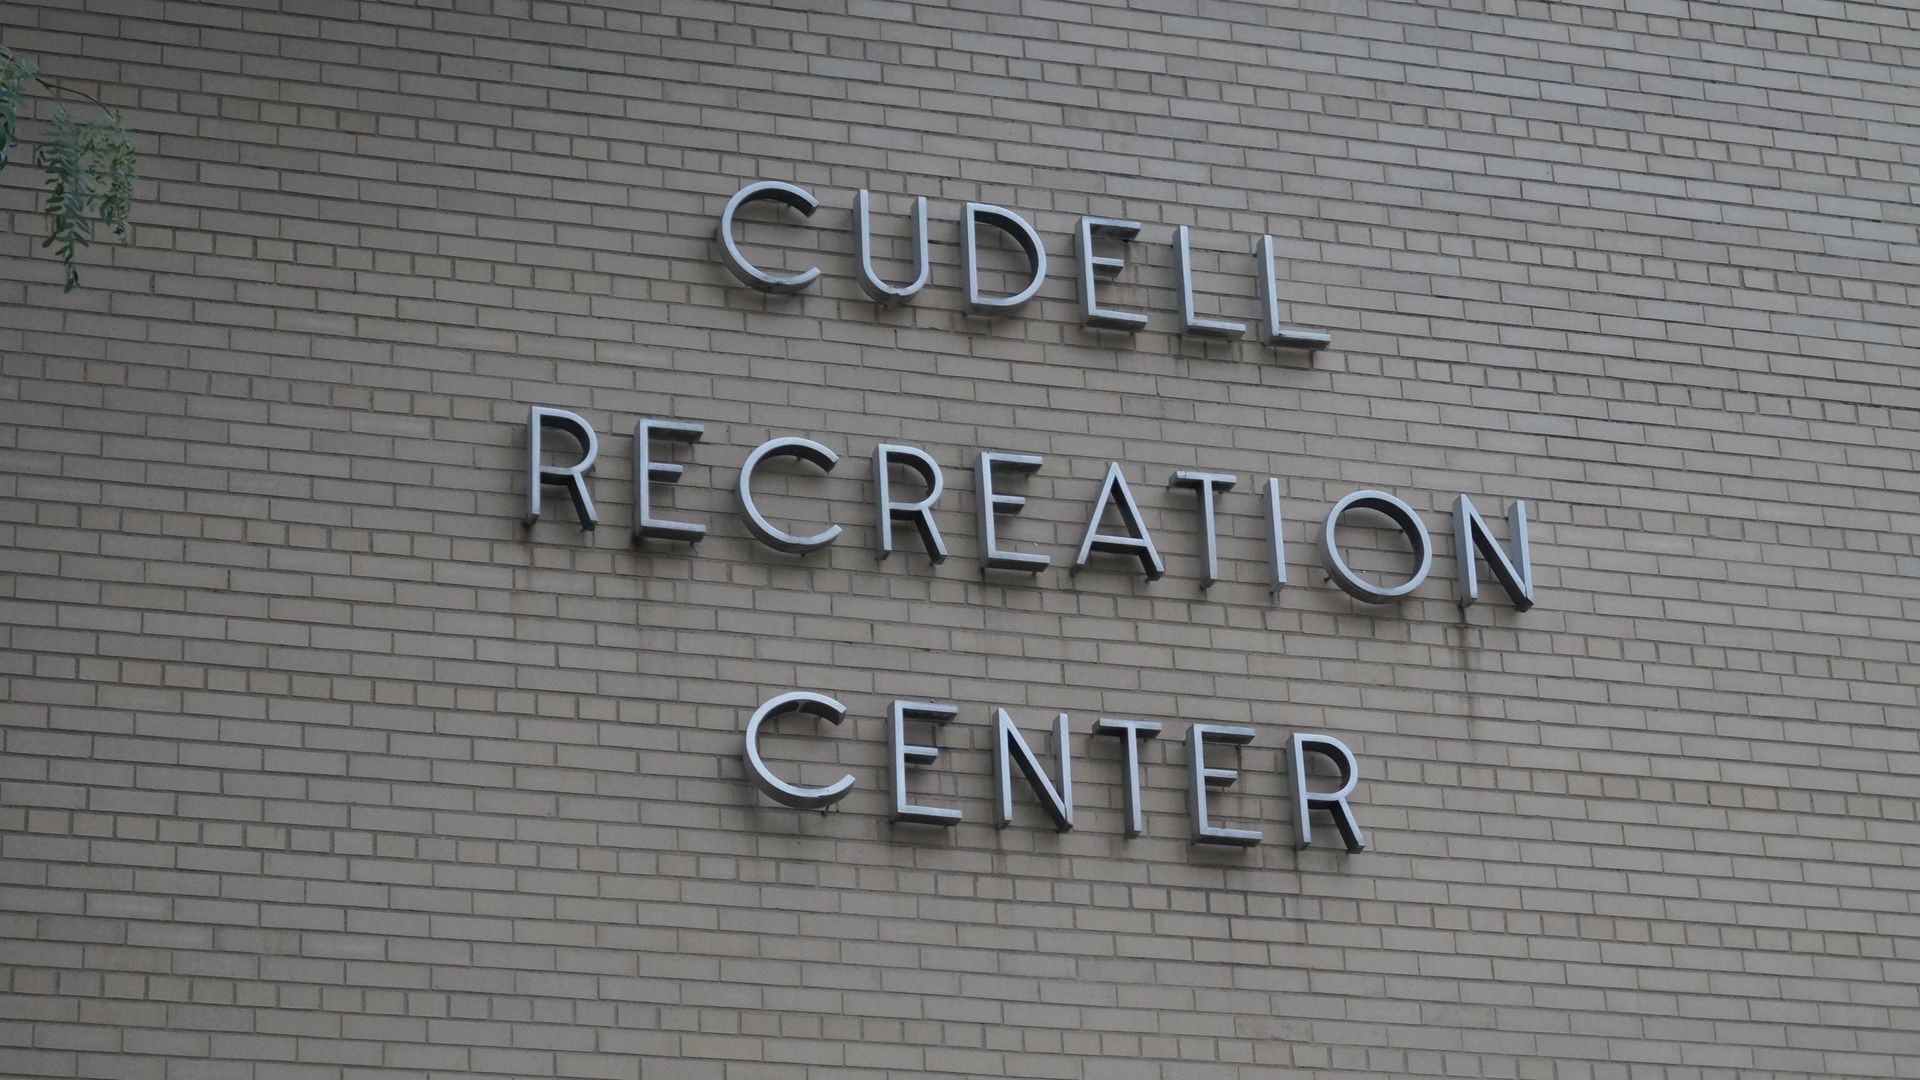 Cudell Recreation Center on Cleveland's west side